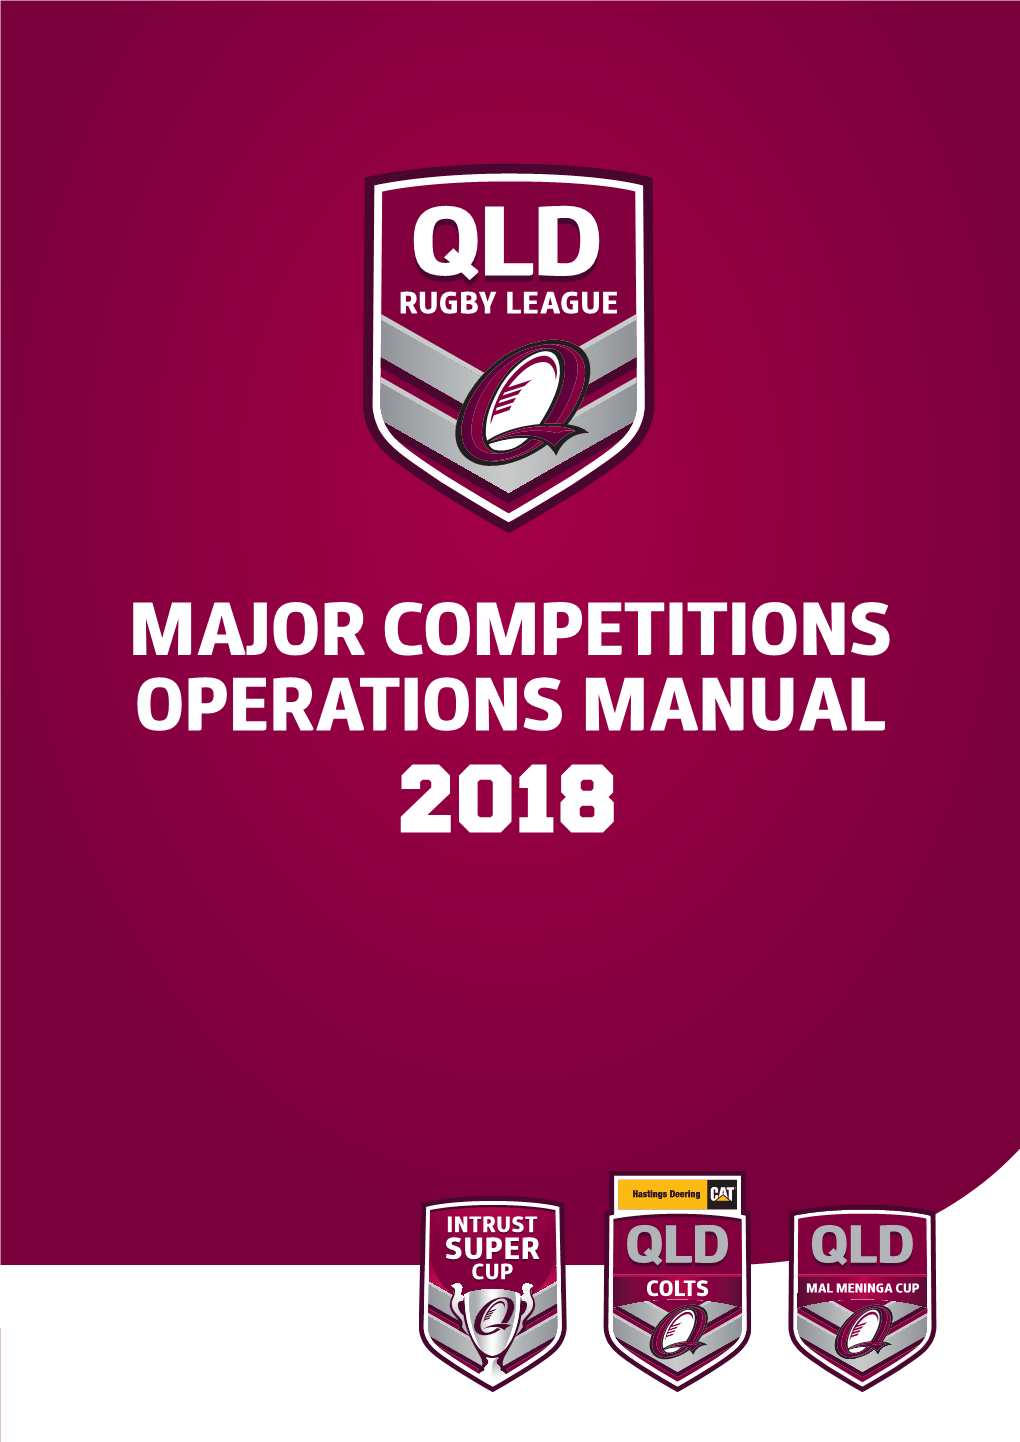 2018 Major Competitions Operations Manual